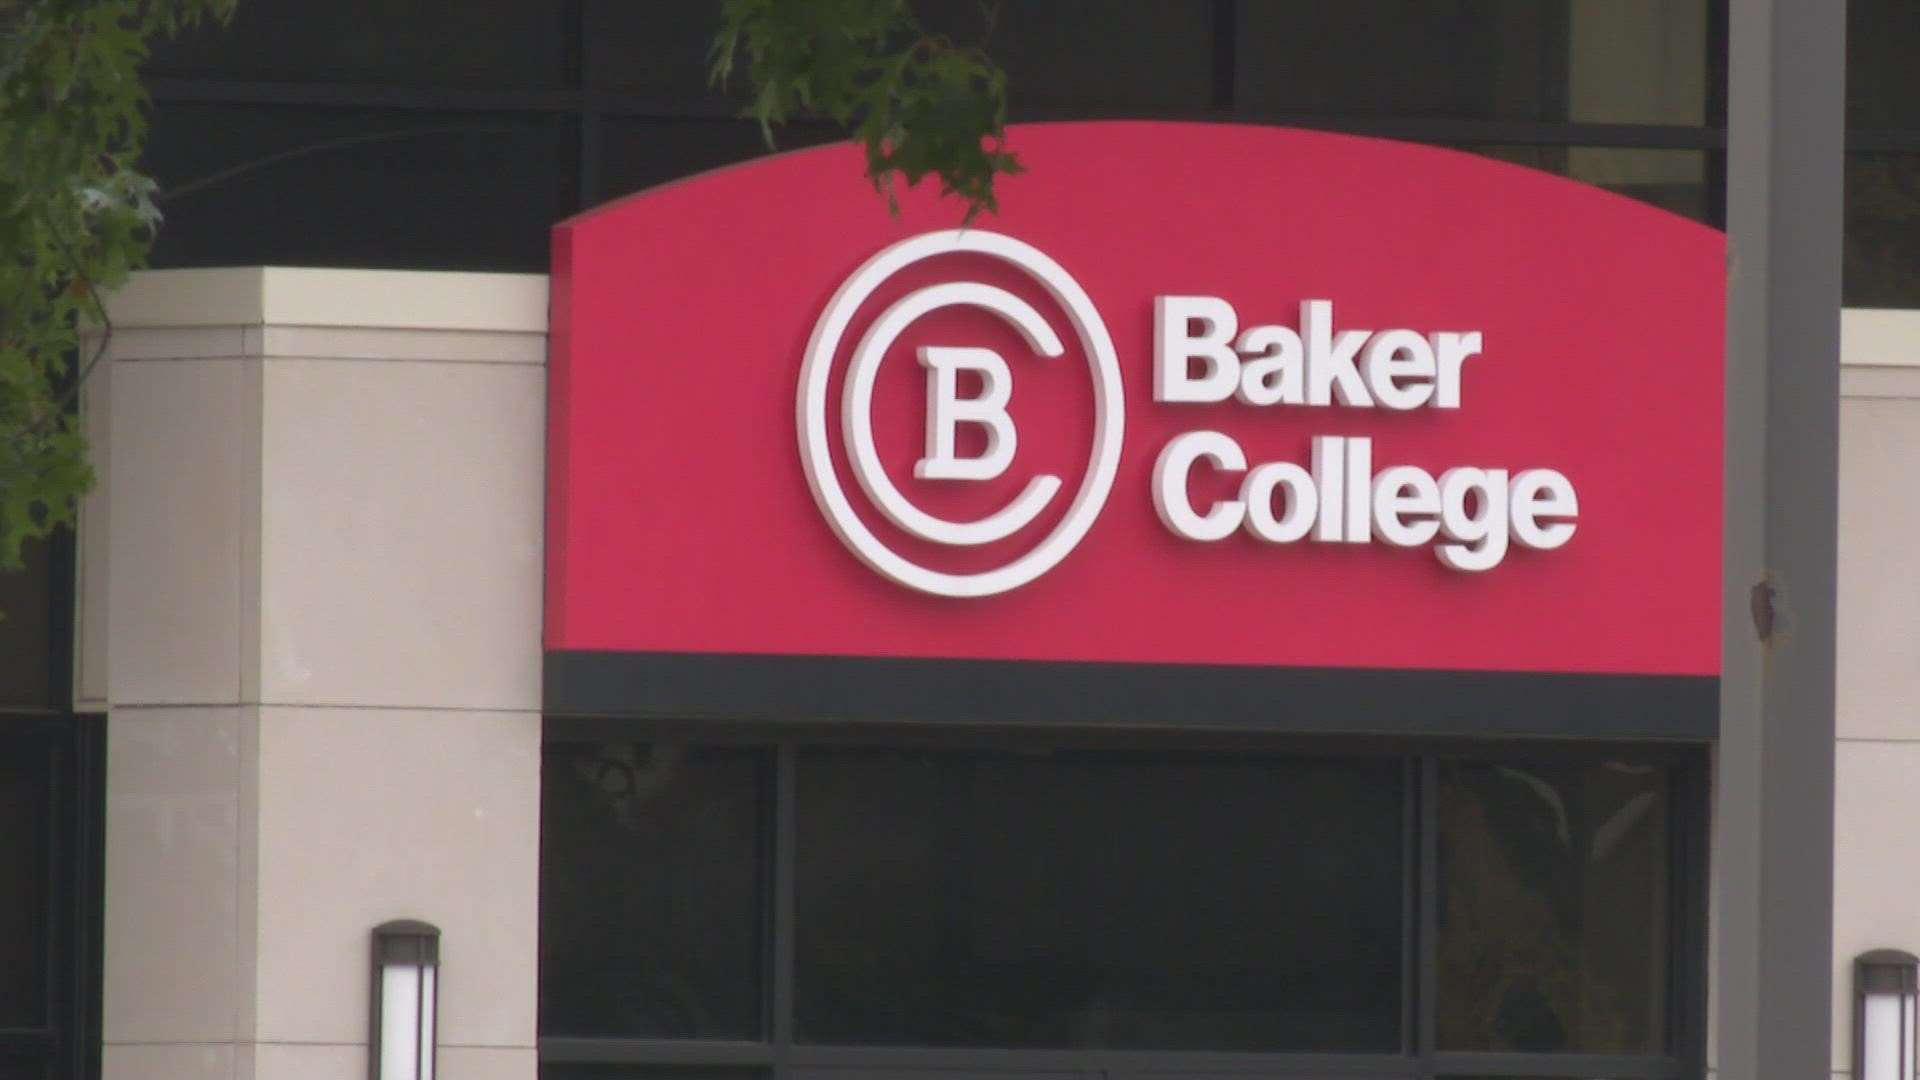 Muskegon County is considering relocating all non-court-related county offices to the Baker College of Muskegon campus.